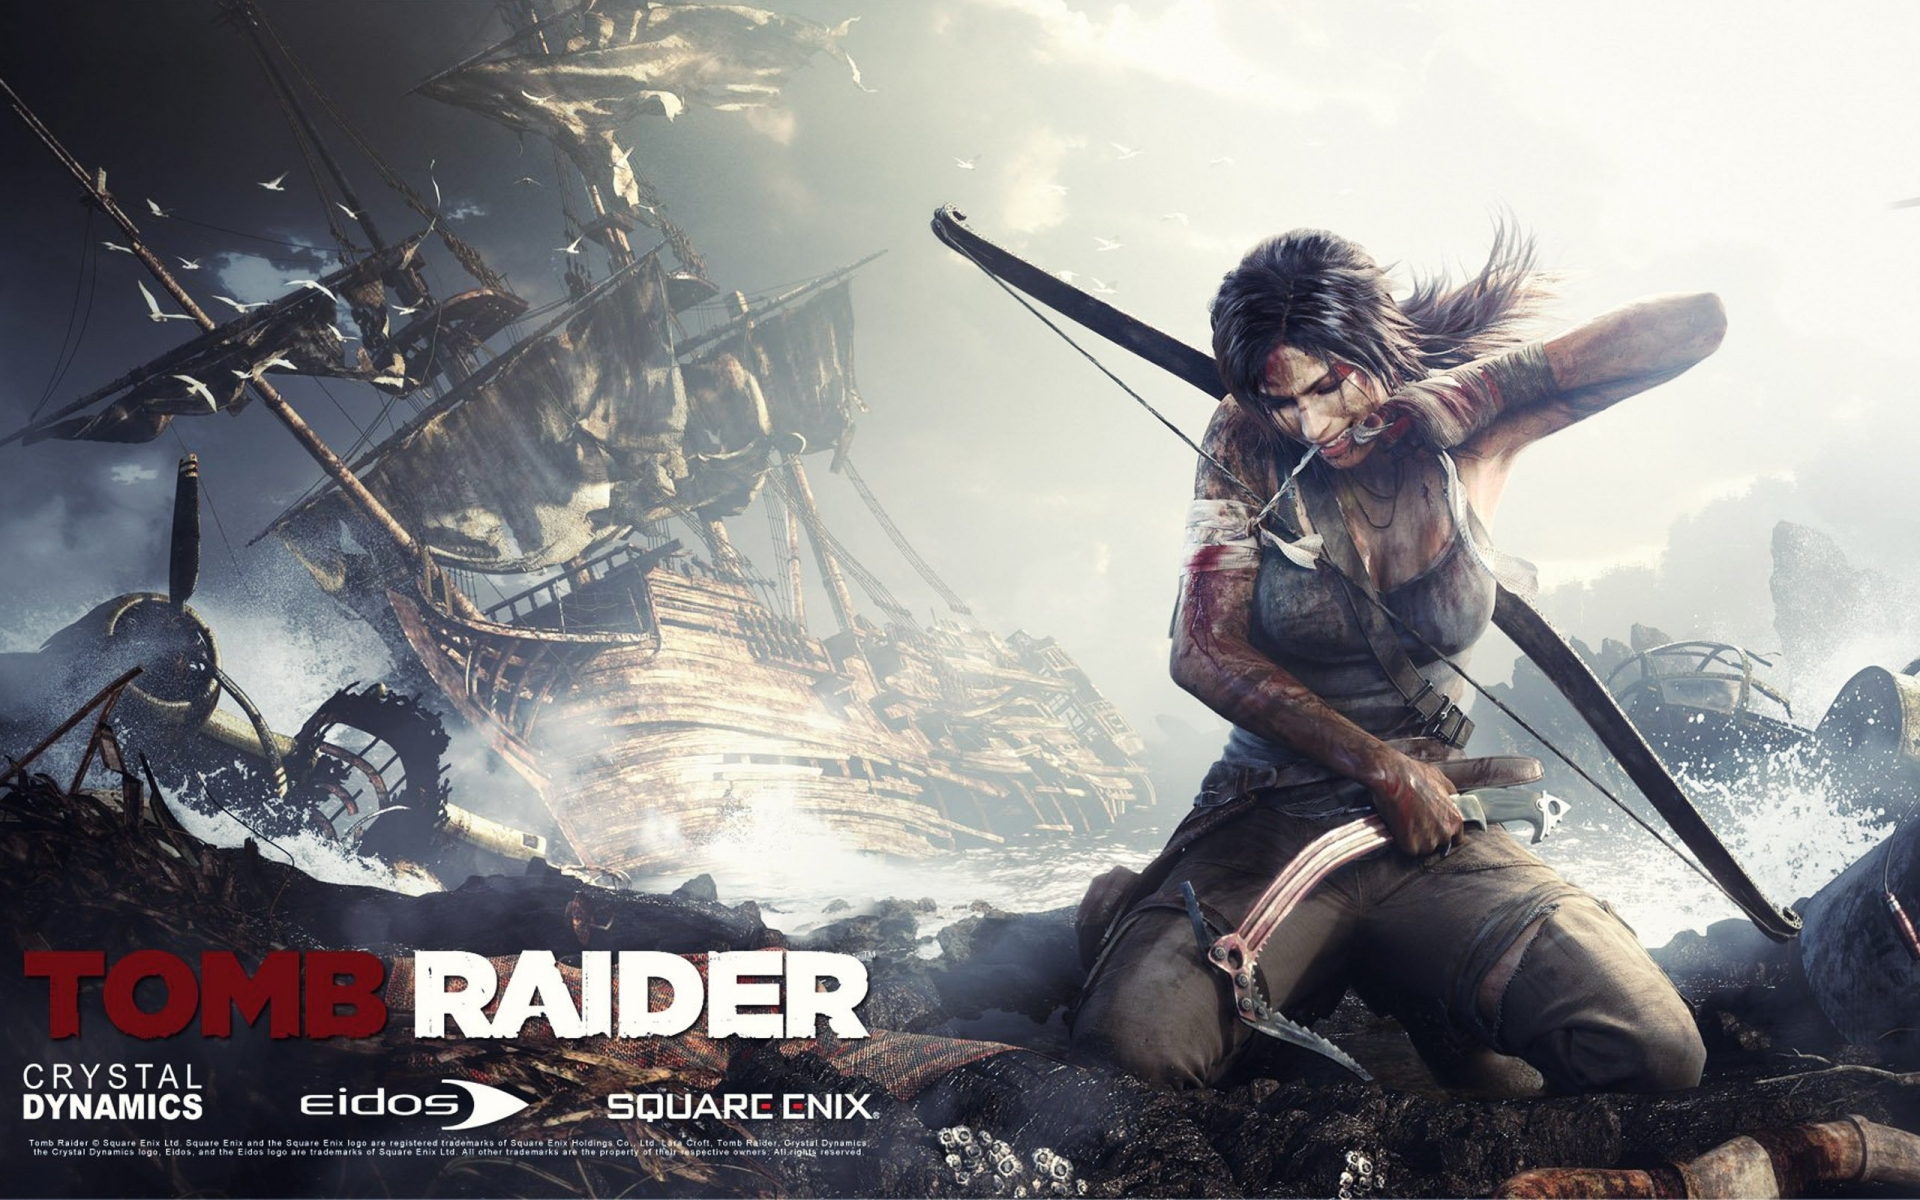 Tomb Raider Weapons Unlocked for 1920 x 1200 widescreen resolution